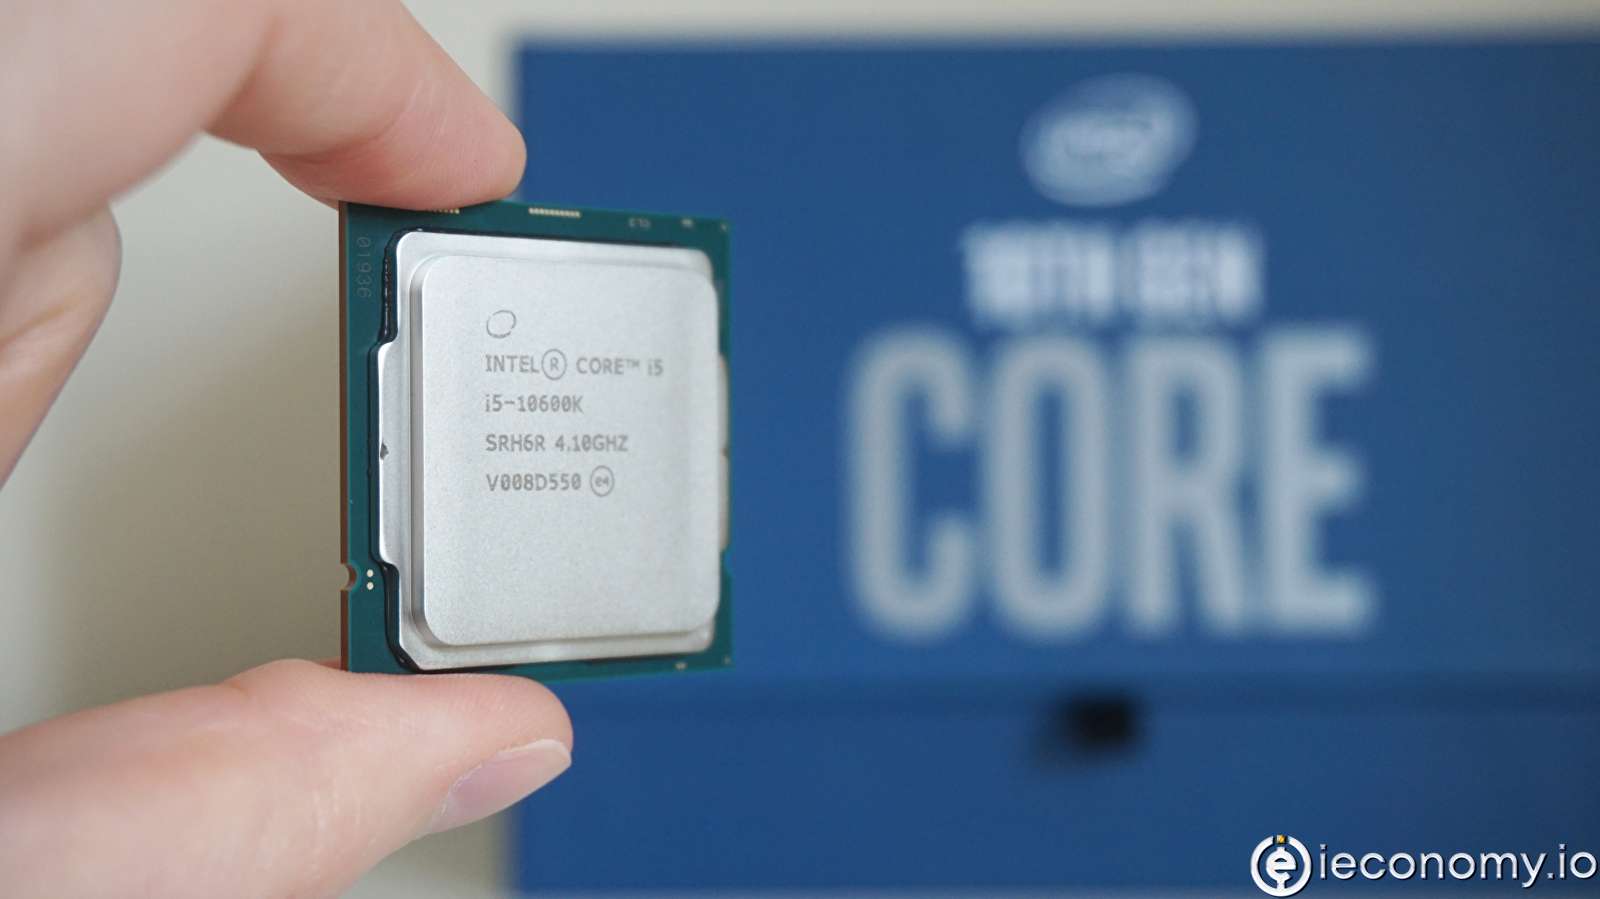 Intel continues to benefit from the increased demand for PCs